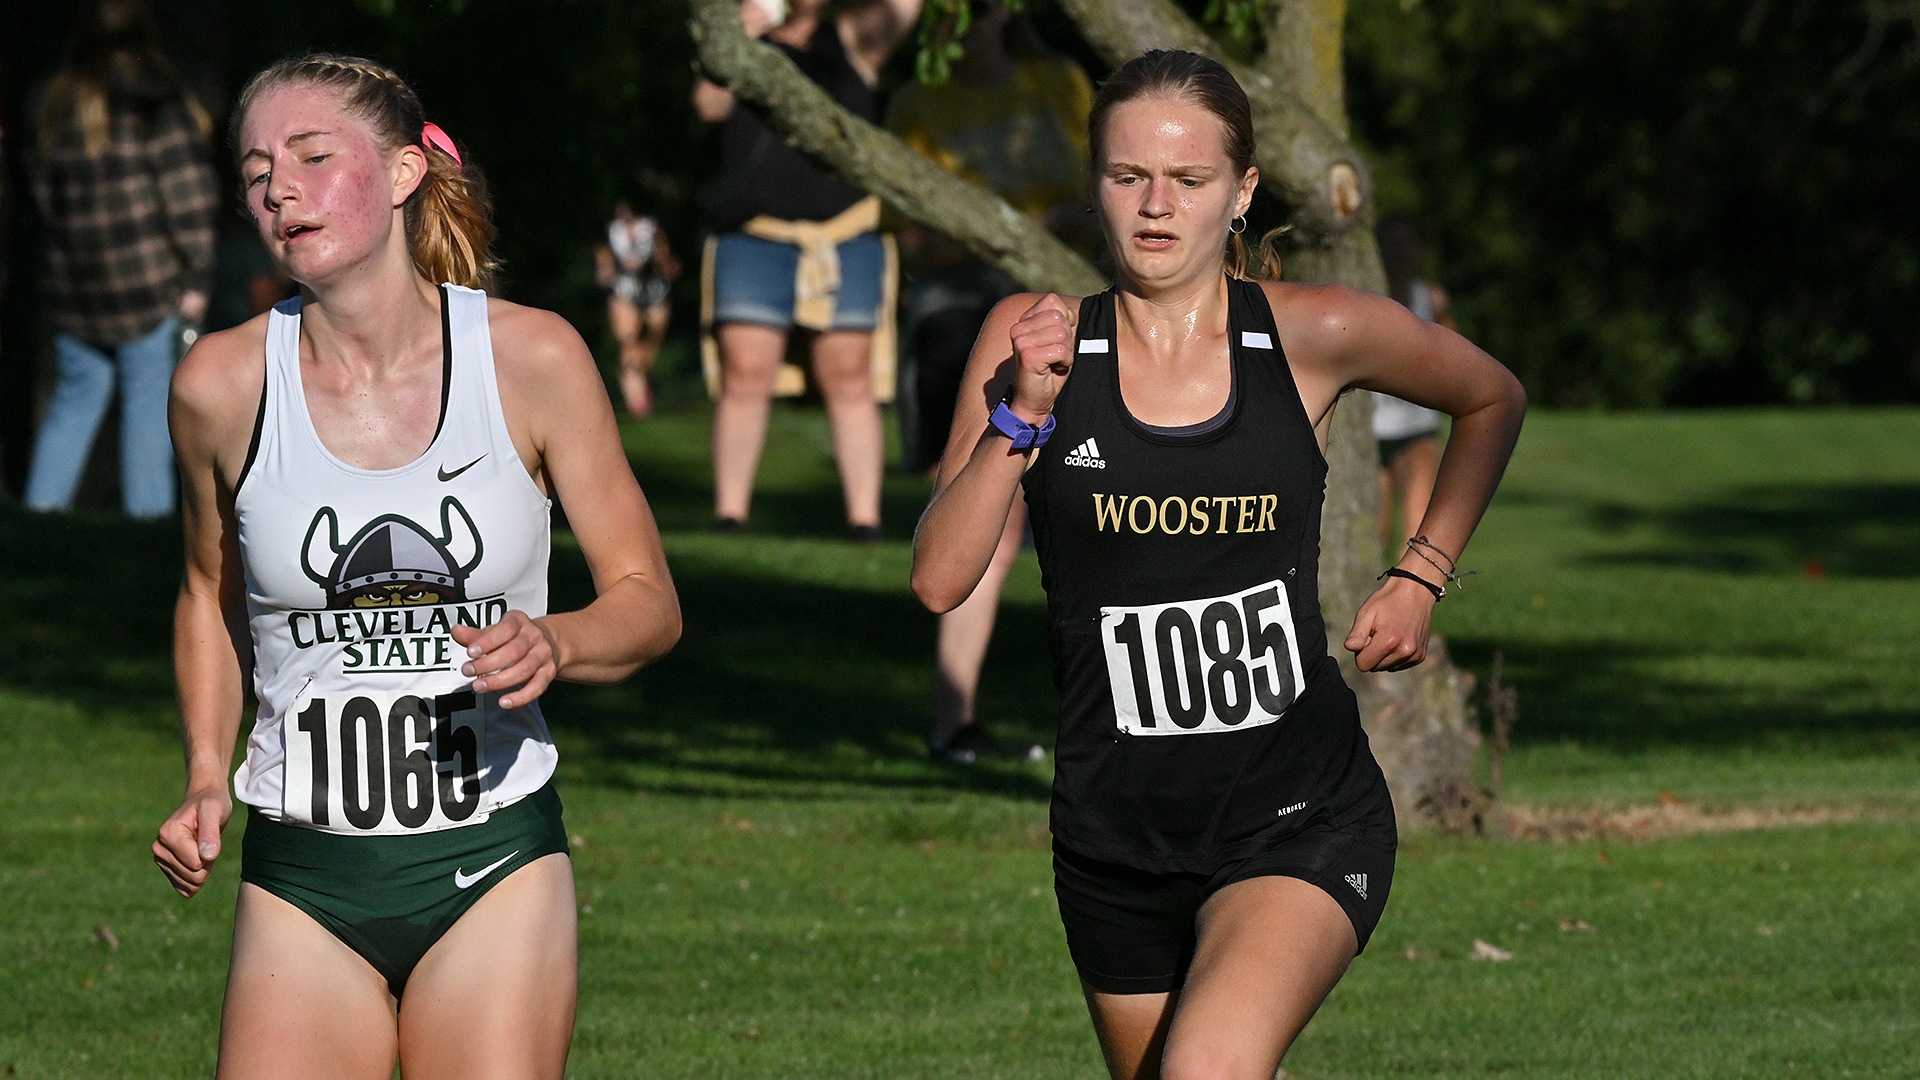 Dylan Kretchmar, Wooster Cross Country